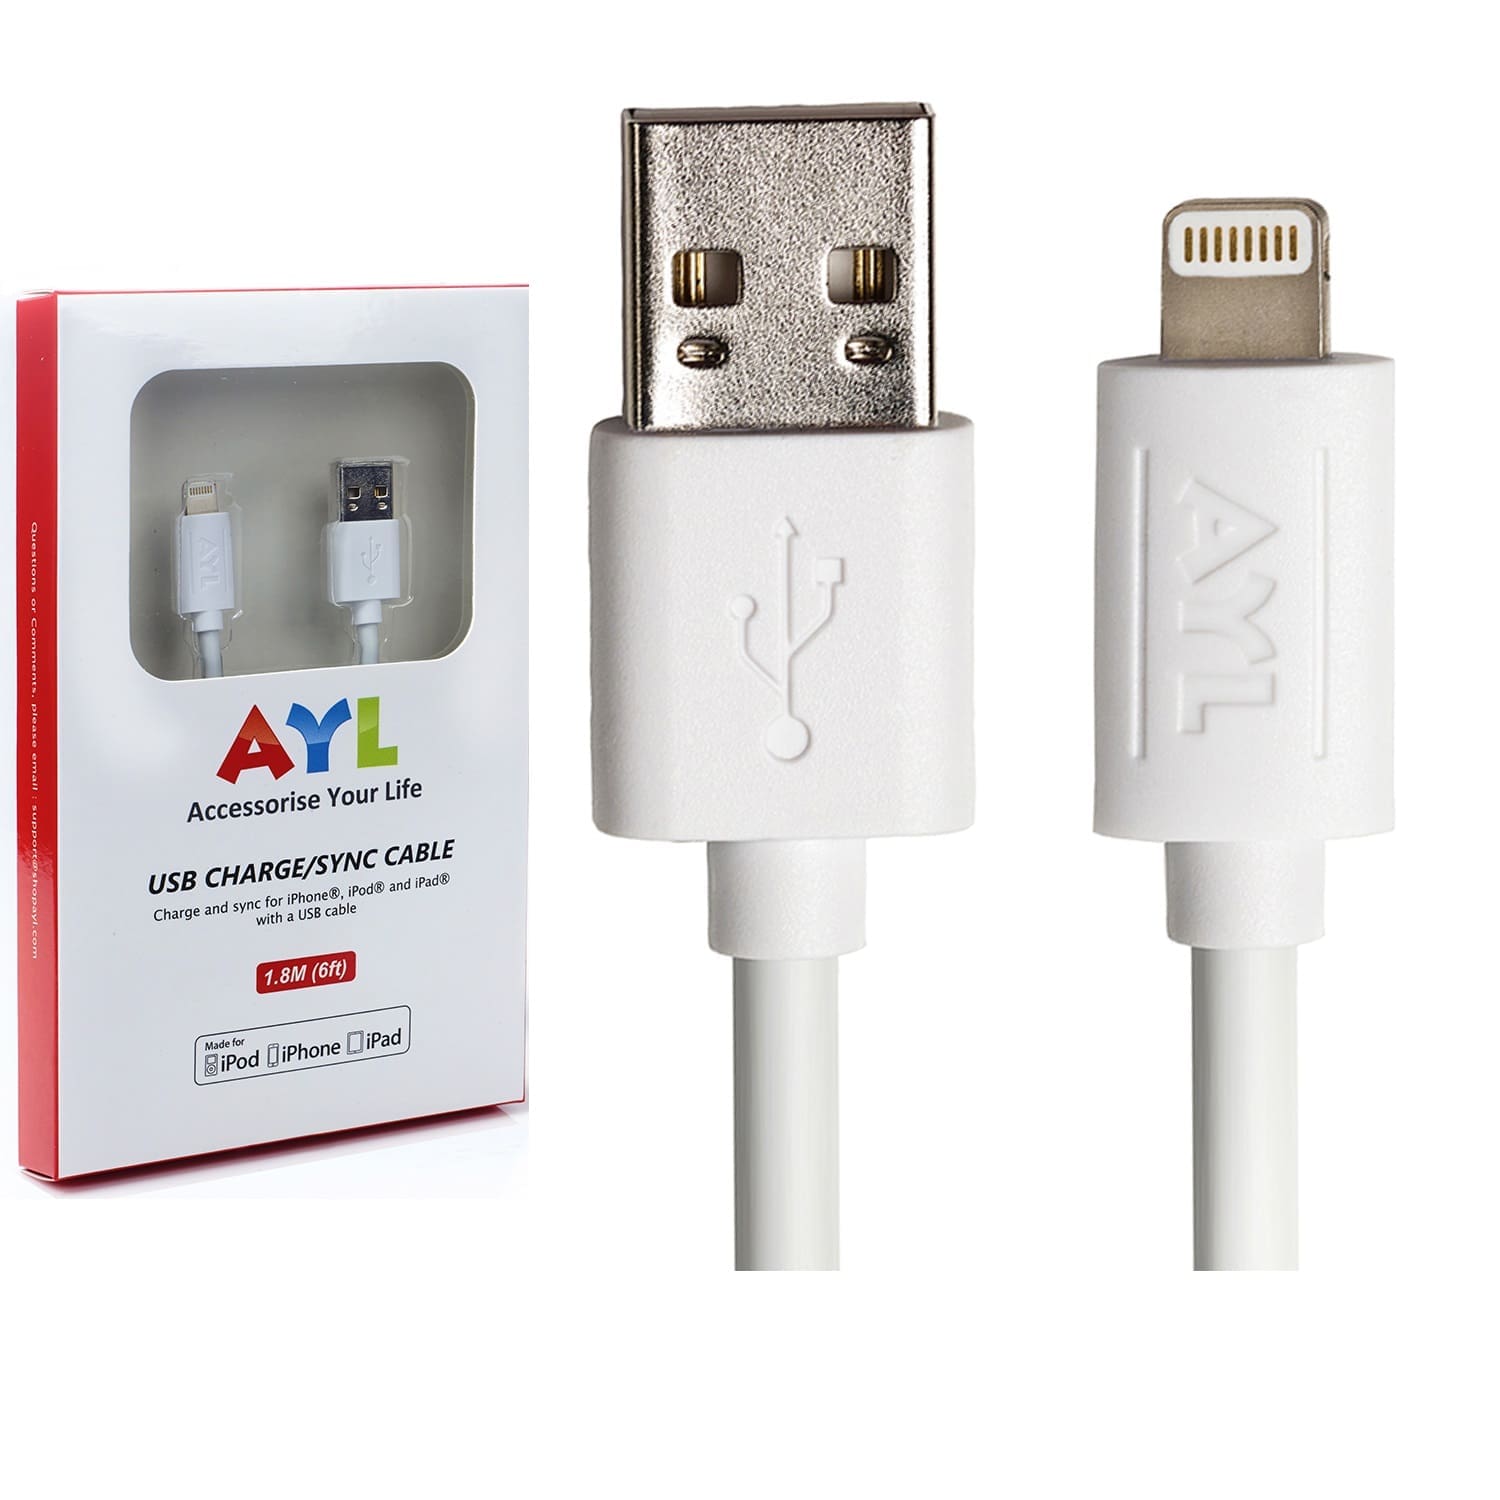 Accessorize Your Life 6' 8-Pin Lightning to USB Cable